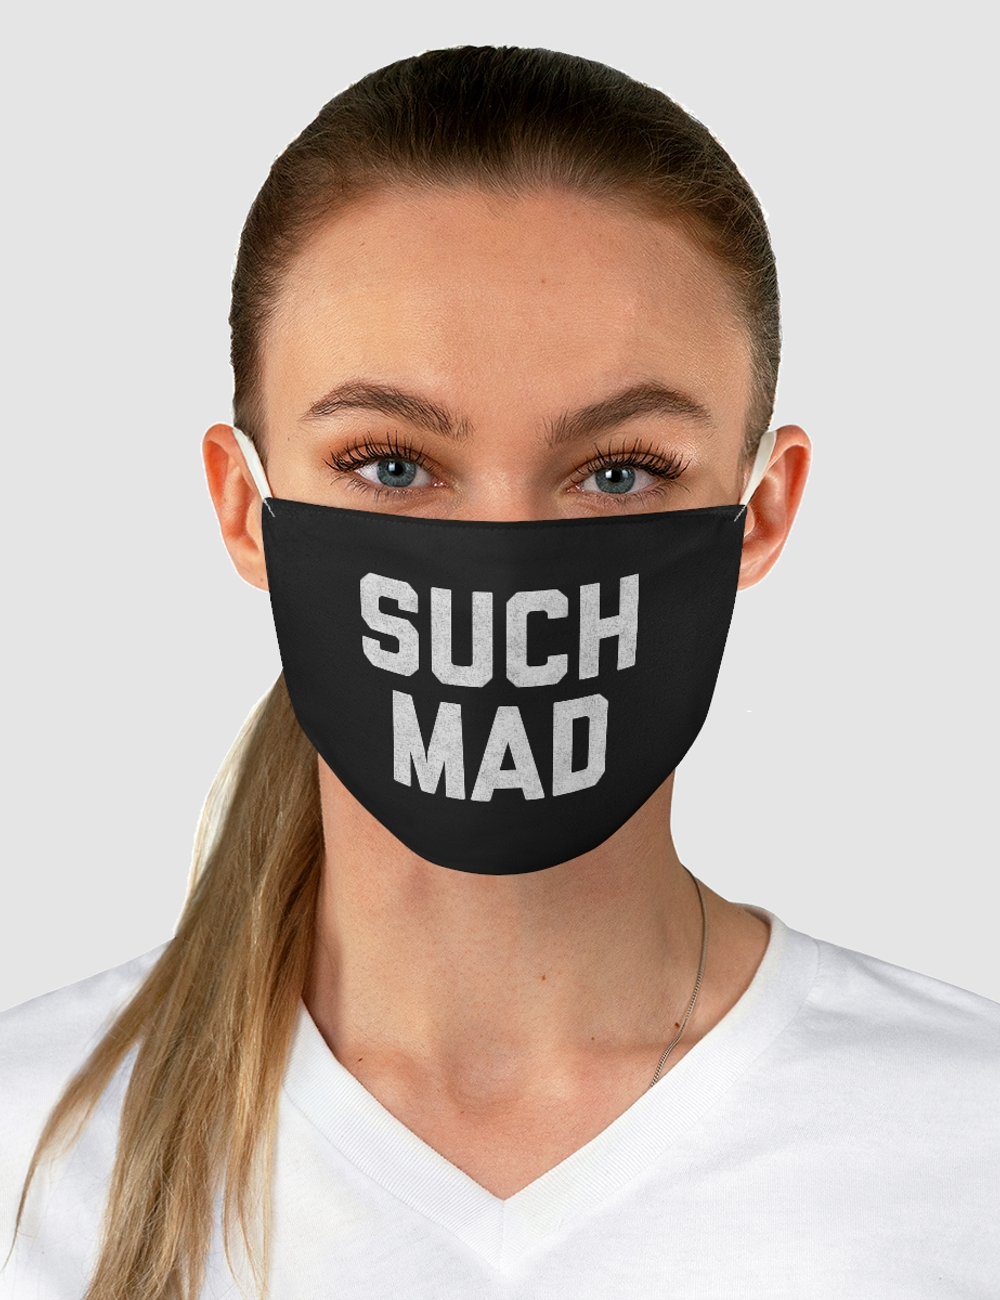 Such Mad | Fabric Face Mask OniTakai